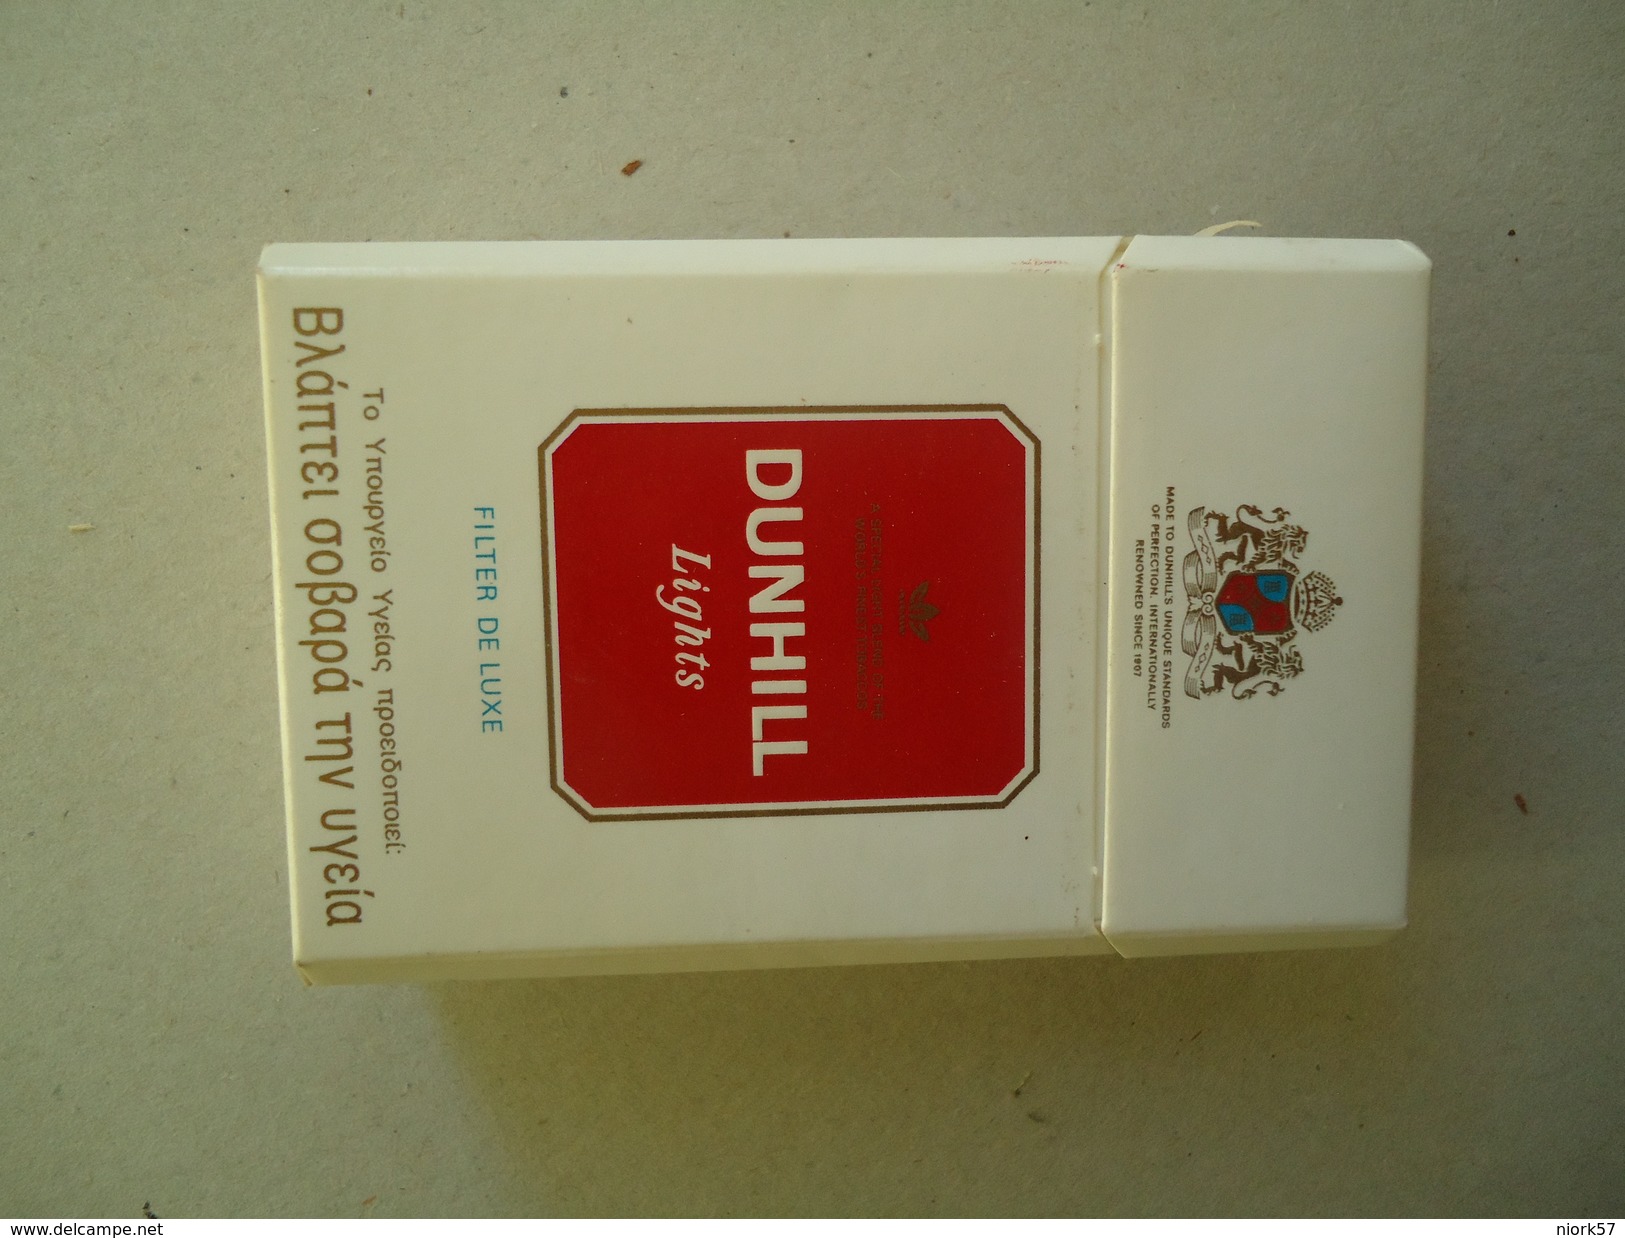 GREECE EMPTY TOBACCO BOXES IN DRACHMAS DUNHILL - Boites à Tabac Vides